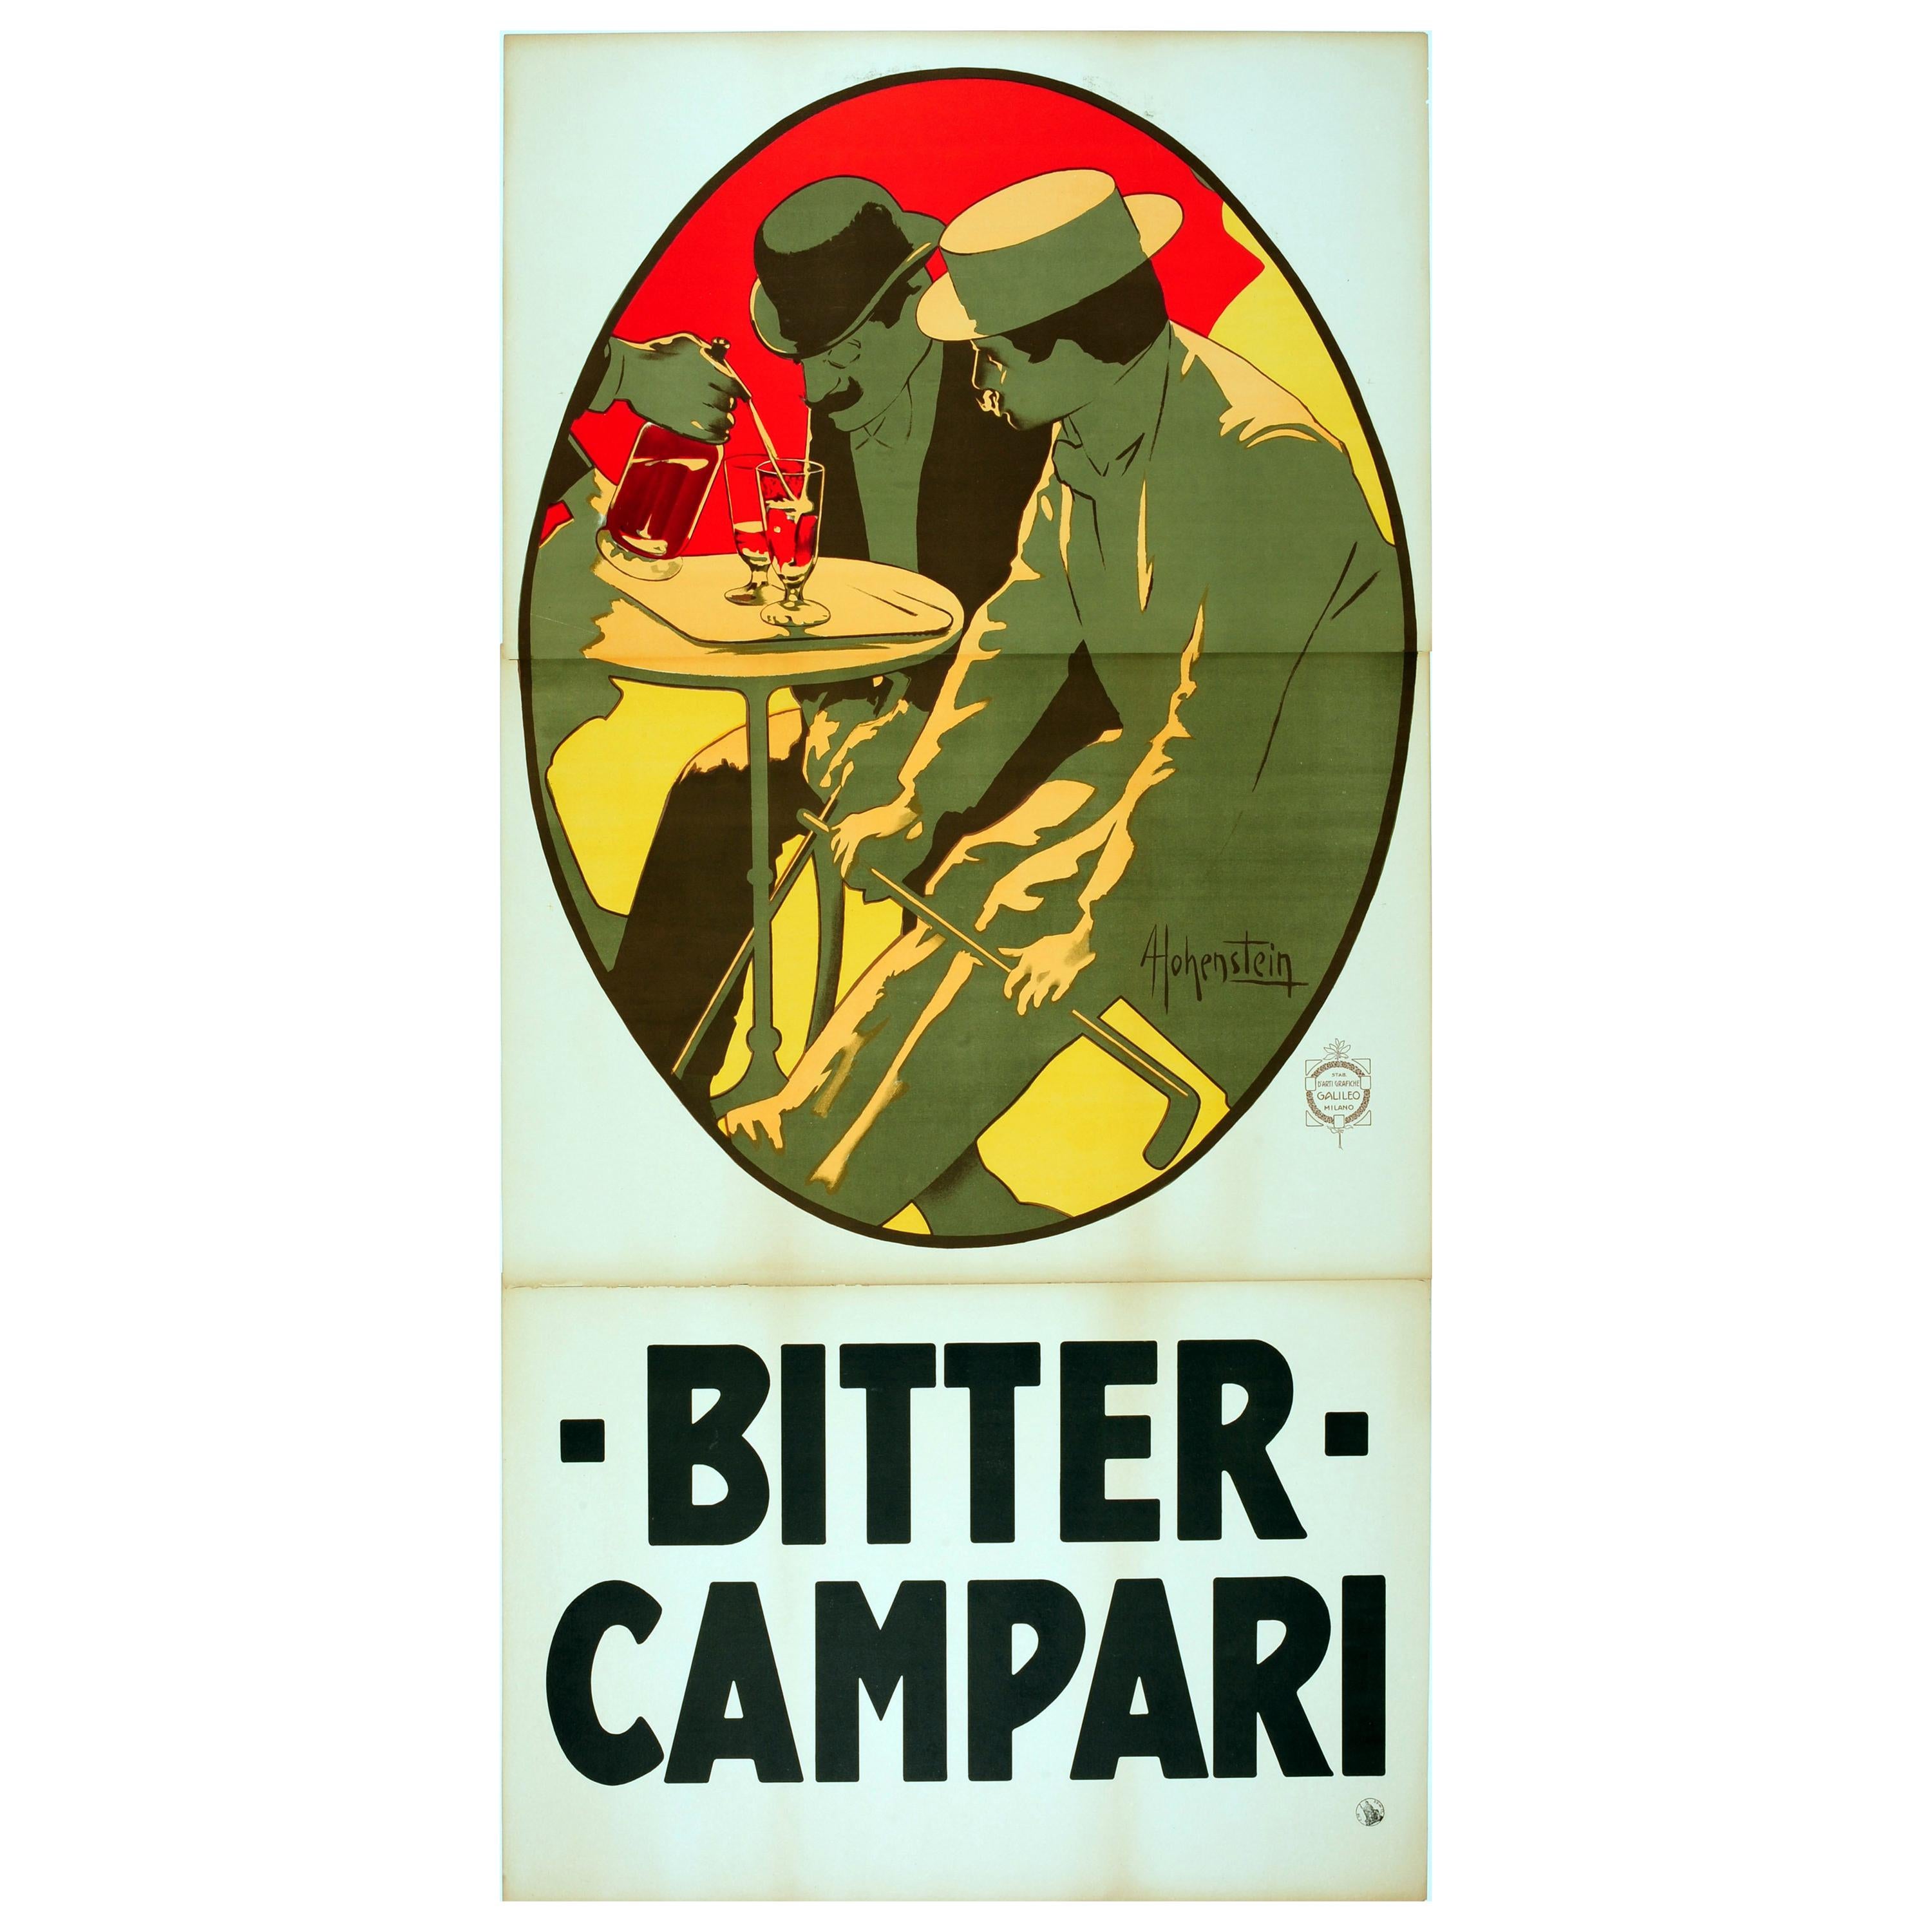 Large Early Original Antique Drink Advertising Poster - Bitter Campari Aperitif For Sale